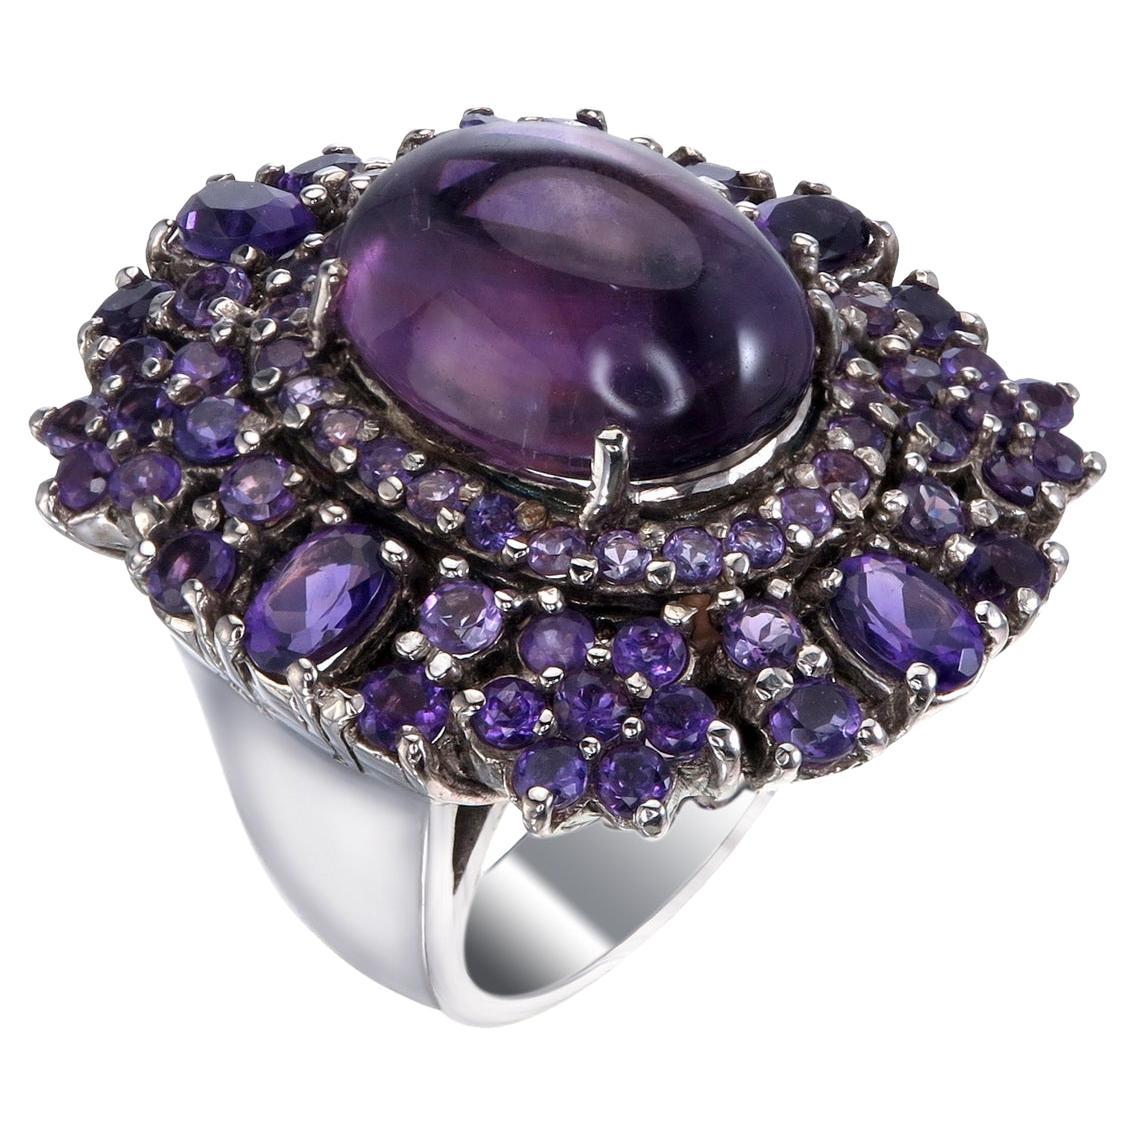 Massive Amethyst Cocktail Ring 925 Sterling Silver